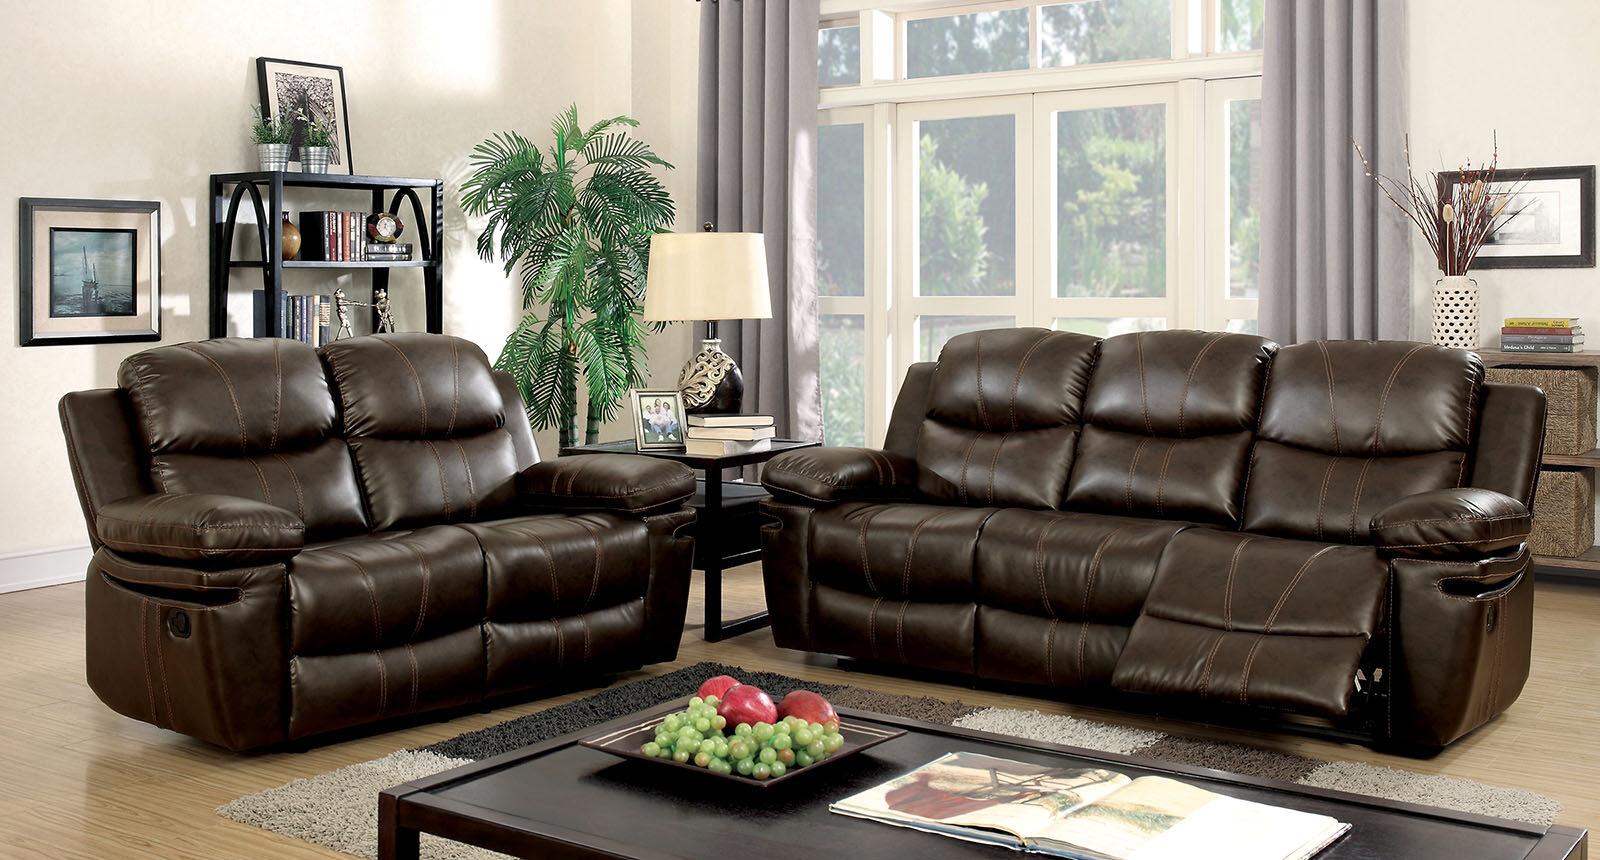 Transitional Recliner Sofa and Loveseat CM6992-2PC Listowel CM6992-2PC in Brown Bonded Leather